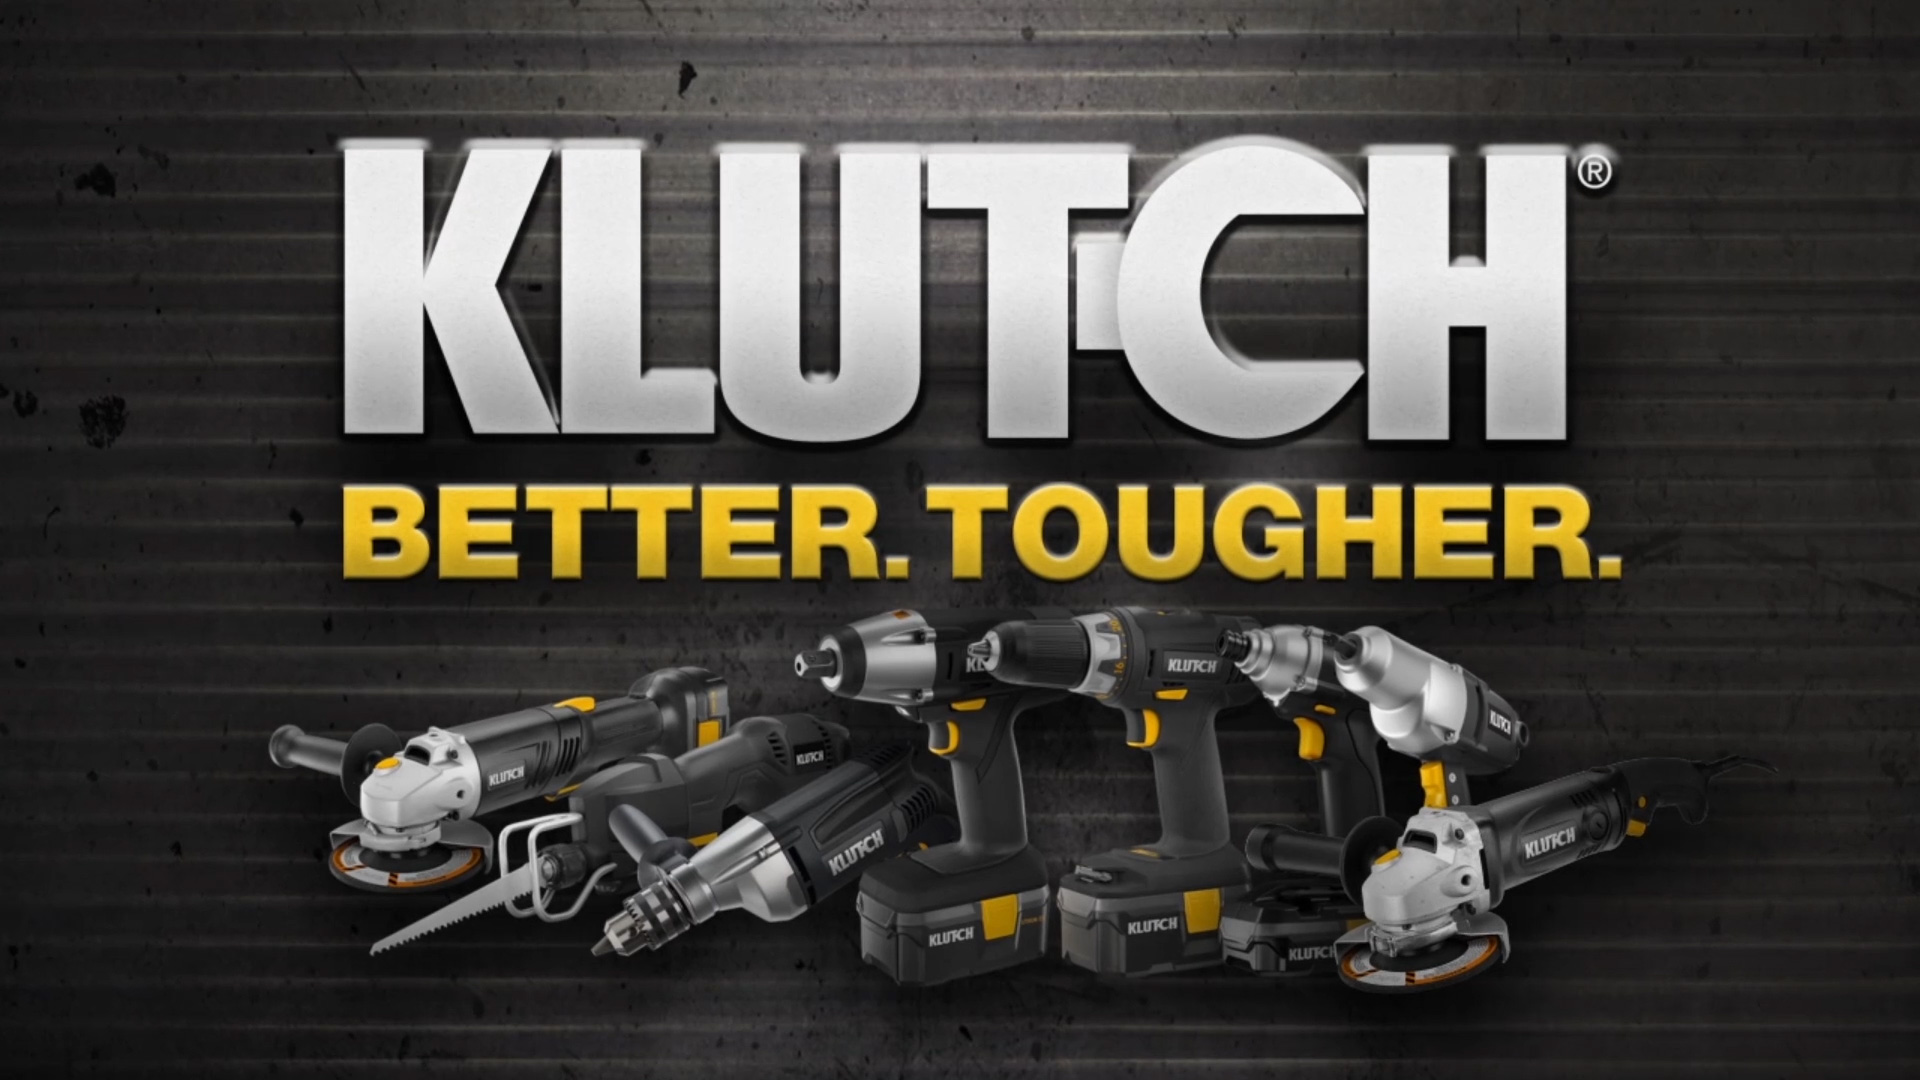 Who Makes Klutch Tools